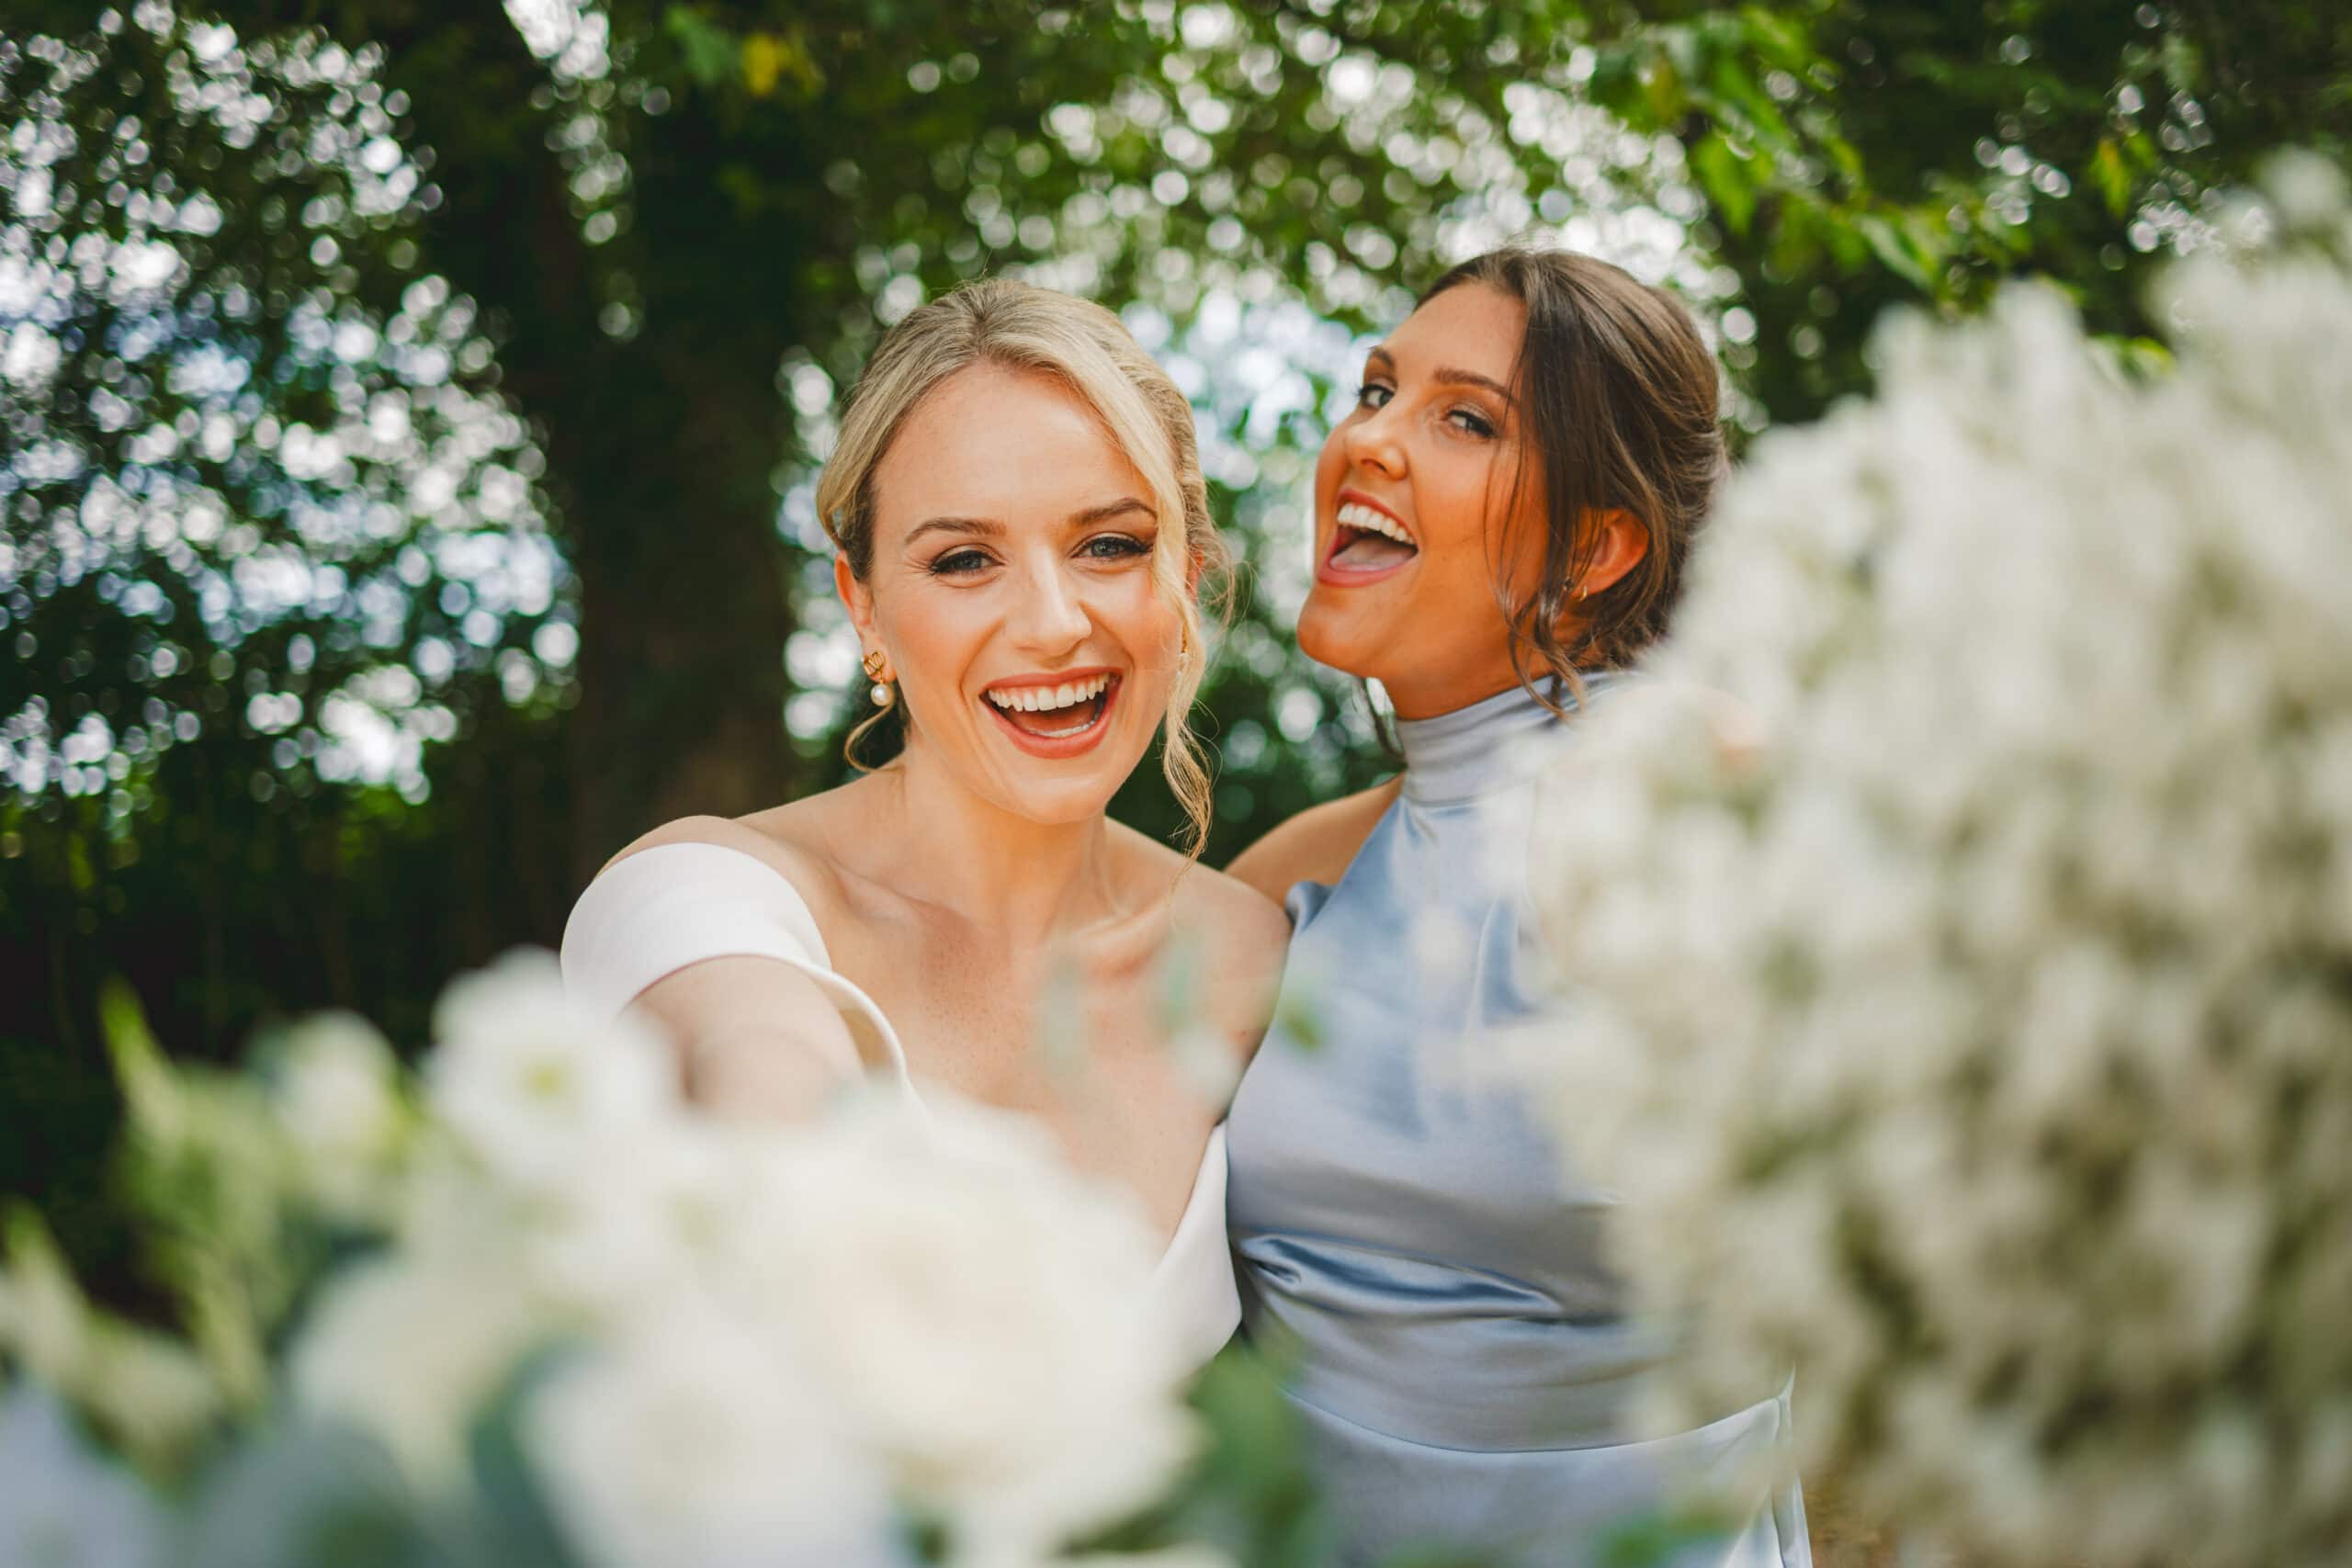 Two bridesmaids laughing while holding bouquets.